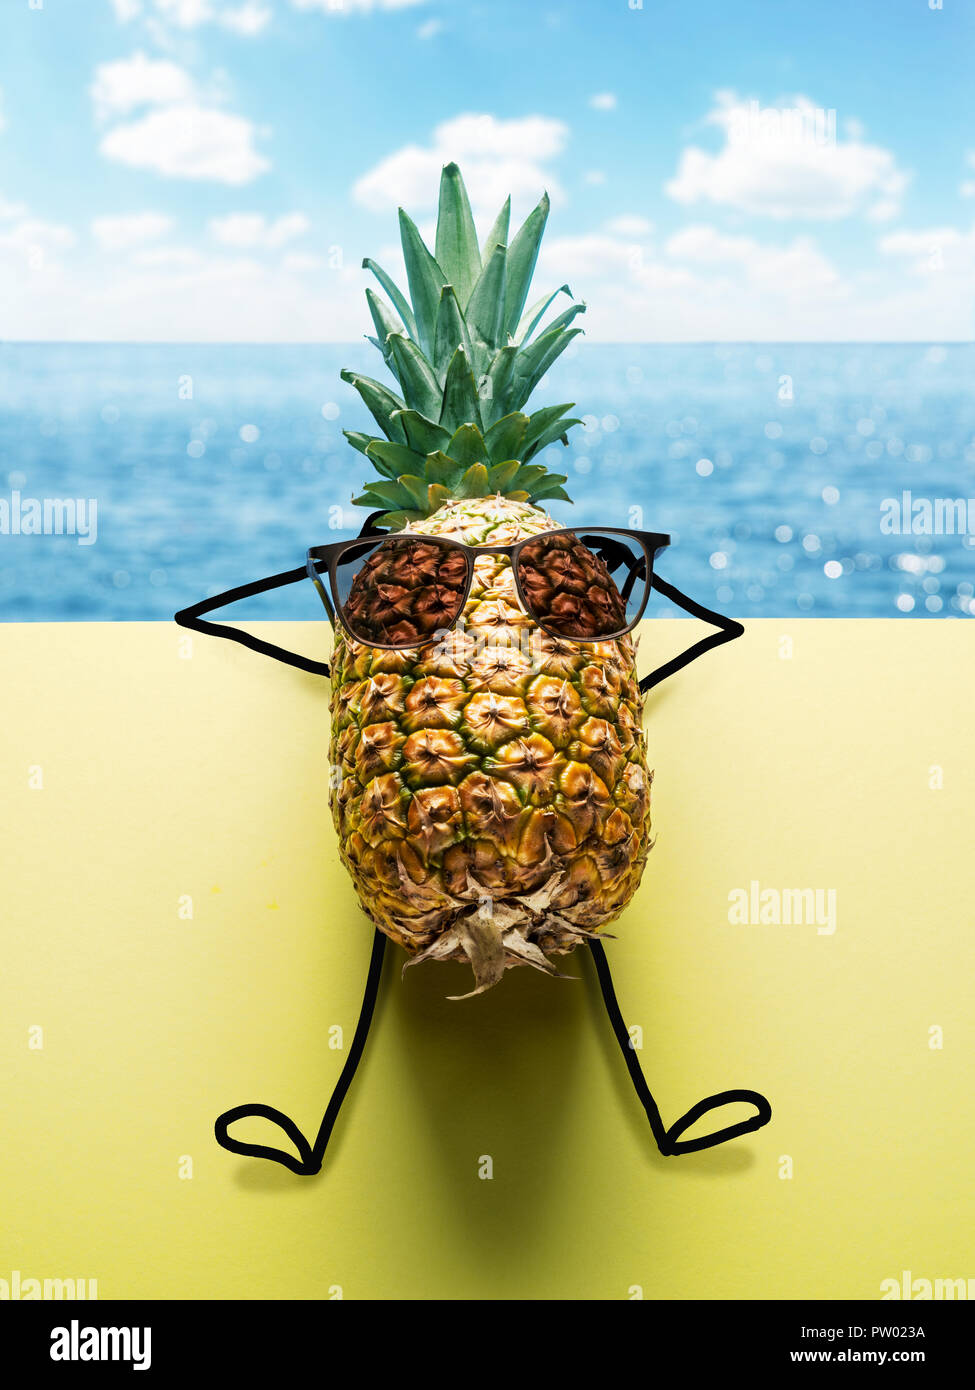 Pineapple man in sun glasses on blue-and-yellow background. Sea and cloudly sky at the background. Stock Photo